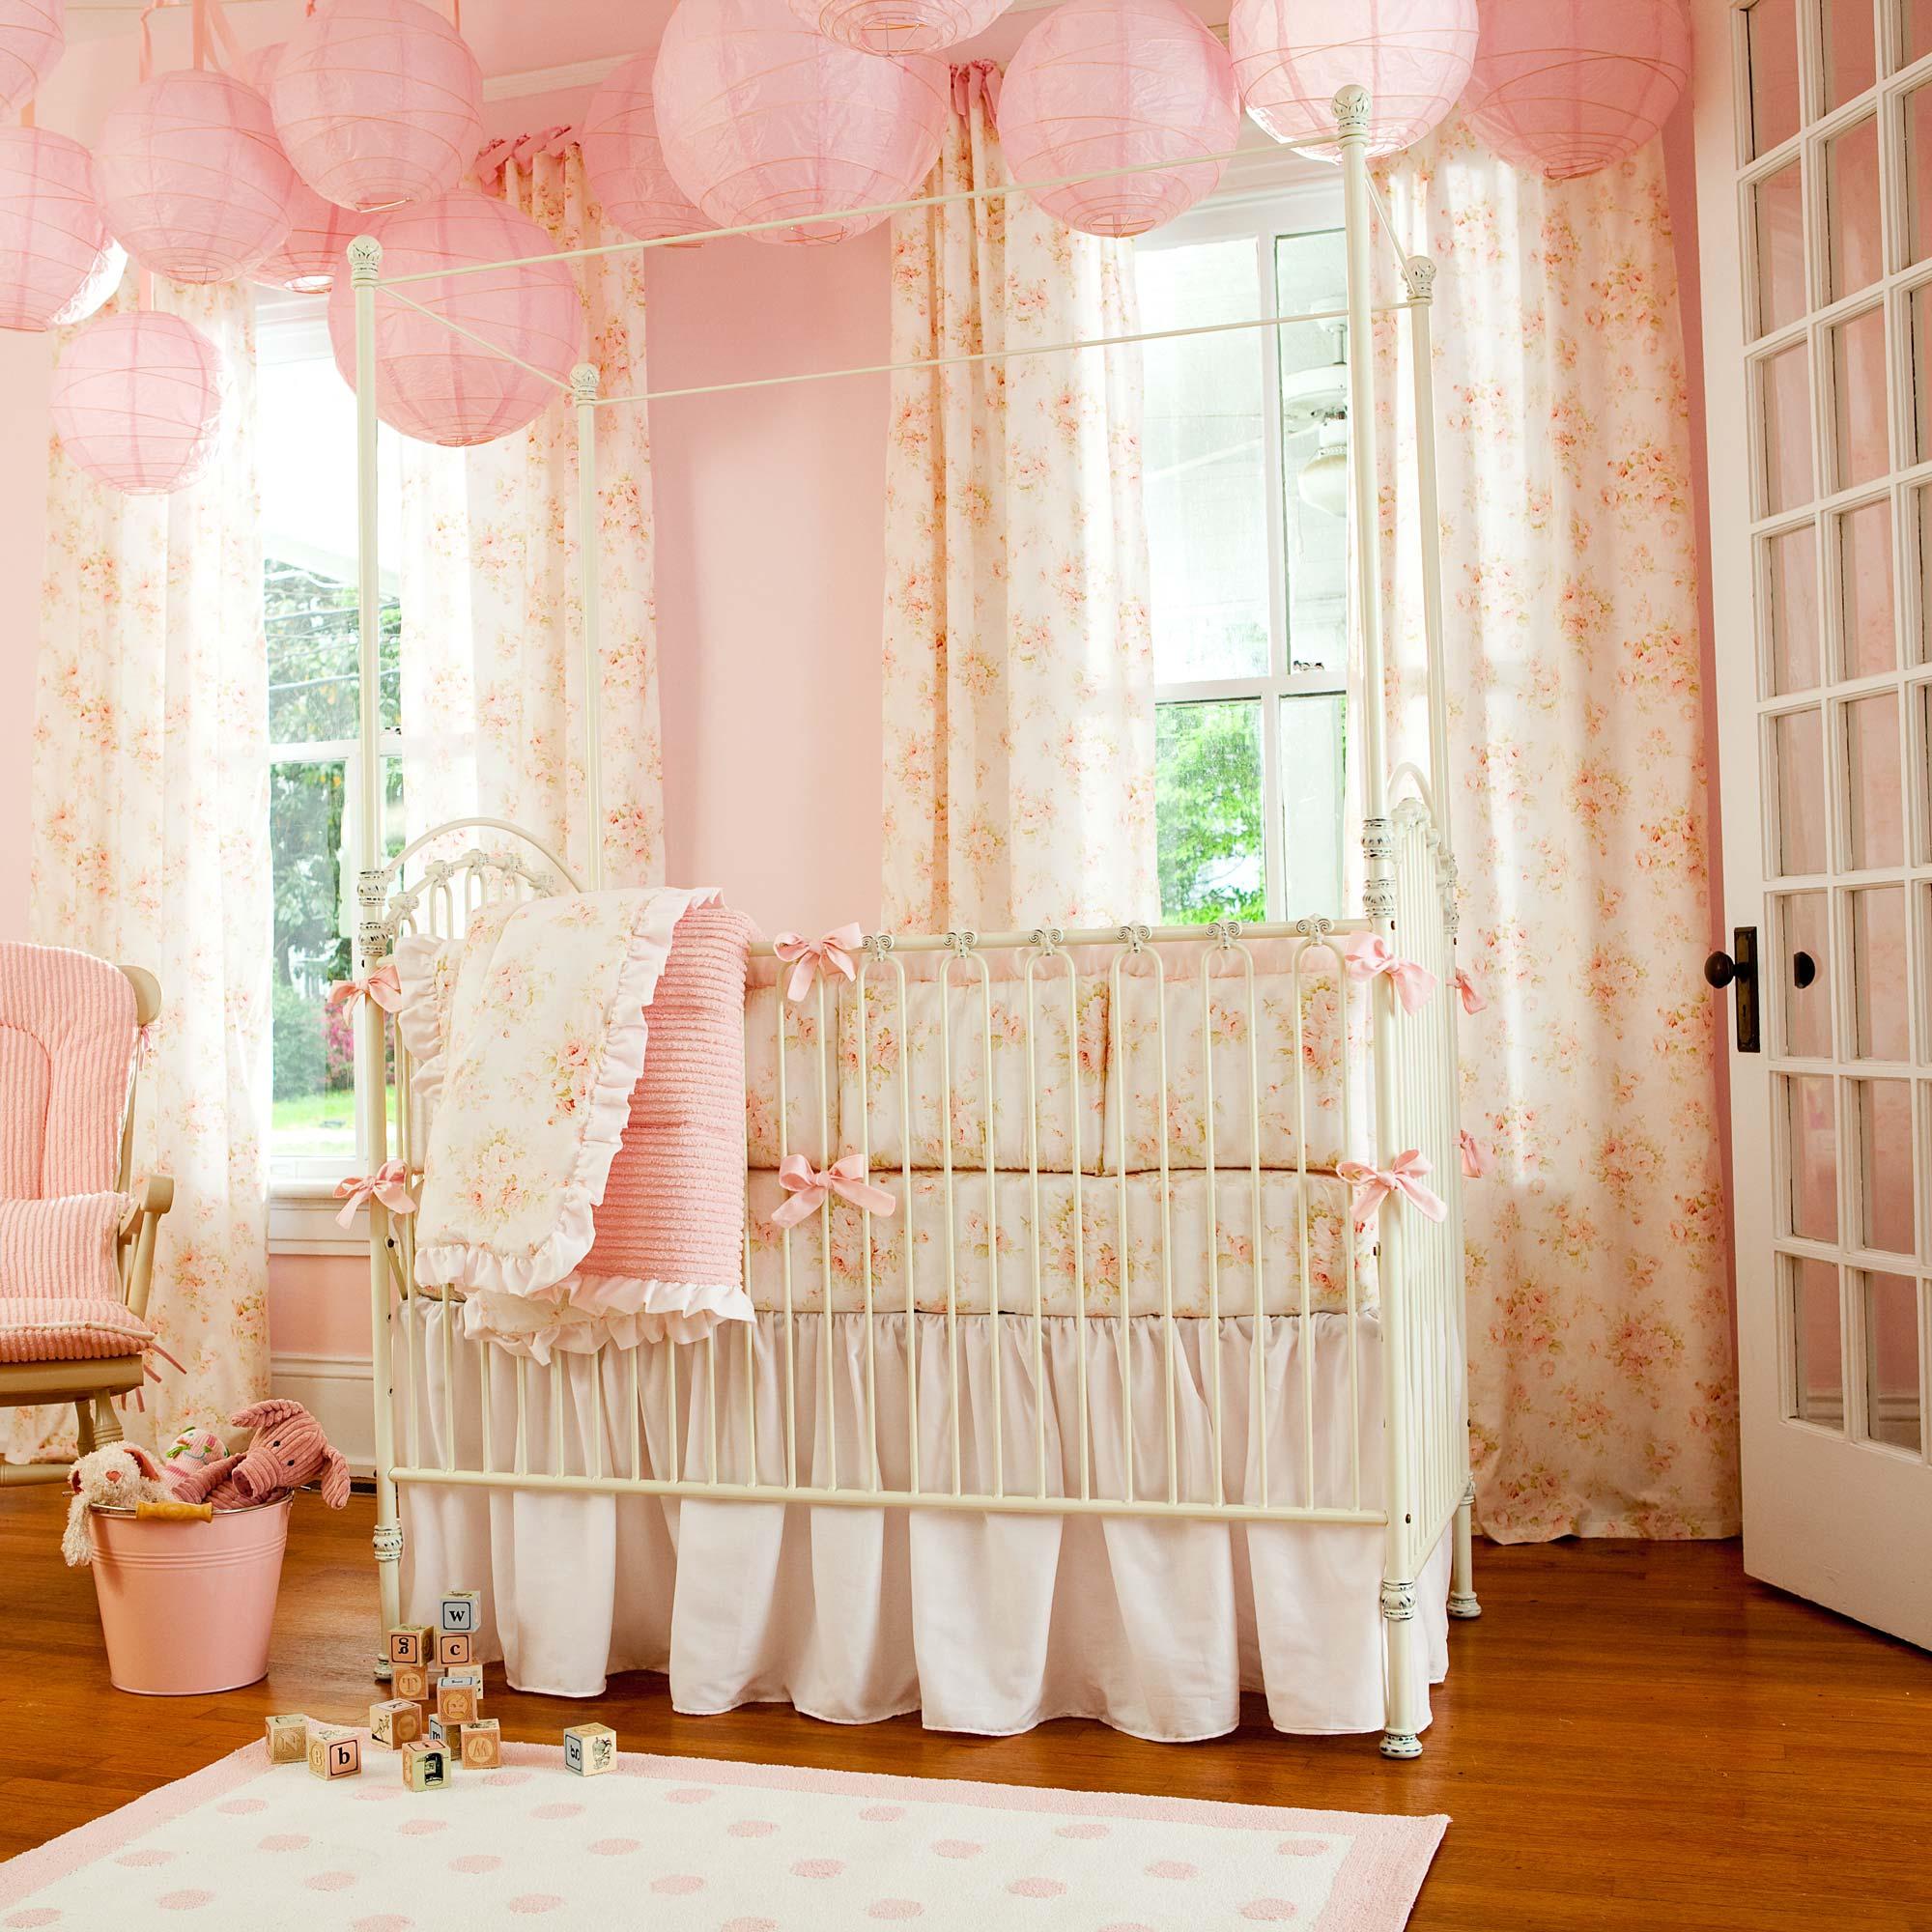 Things to consider before purchasing Baby girl bedding